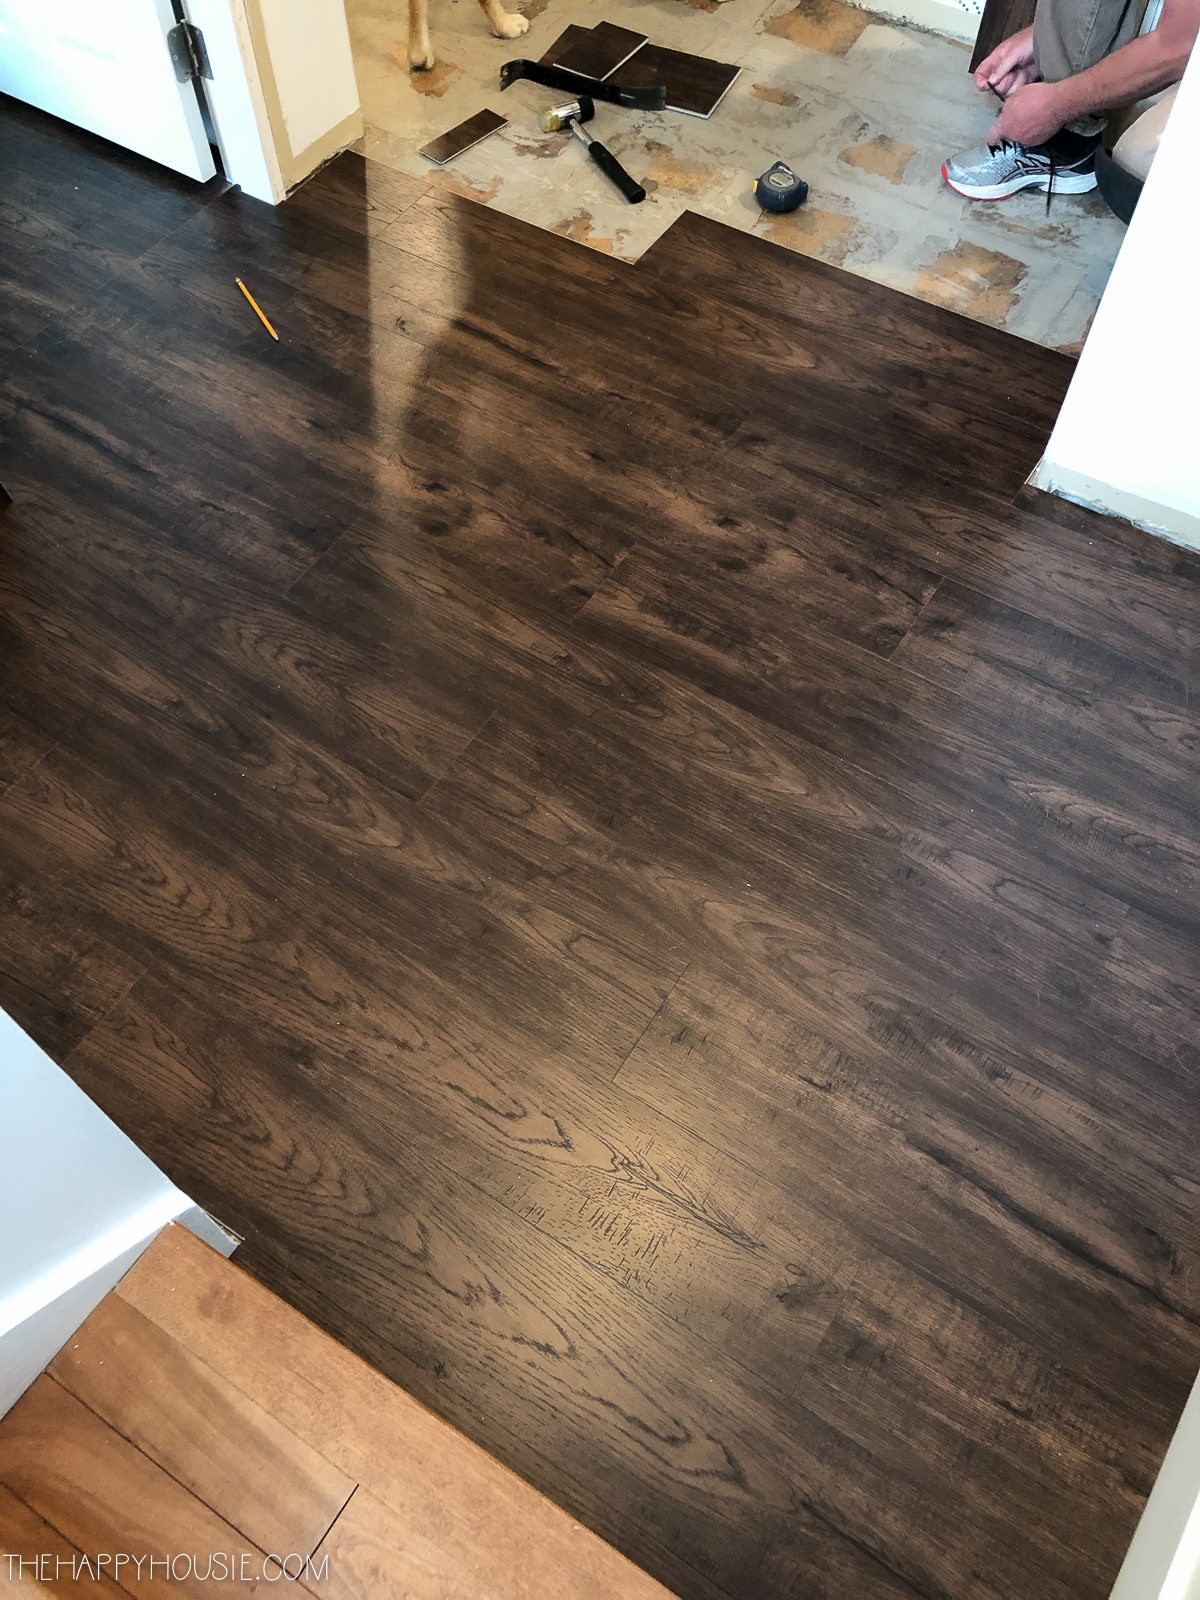 Install Vinyl Plank Over Tile Floors, Can You Go Over Ceramic Tile With Vinyl Plank Flooring